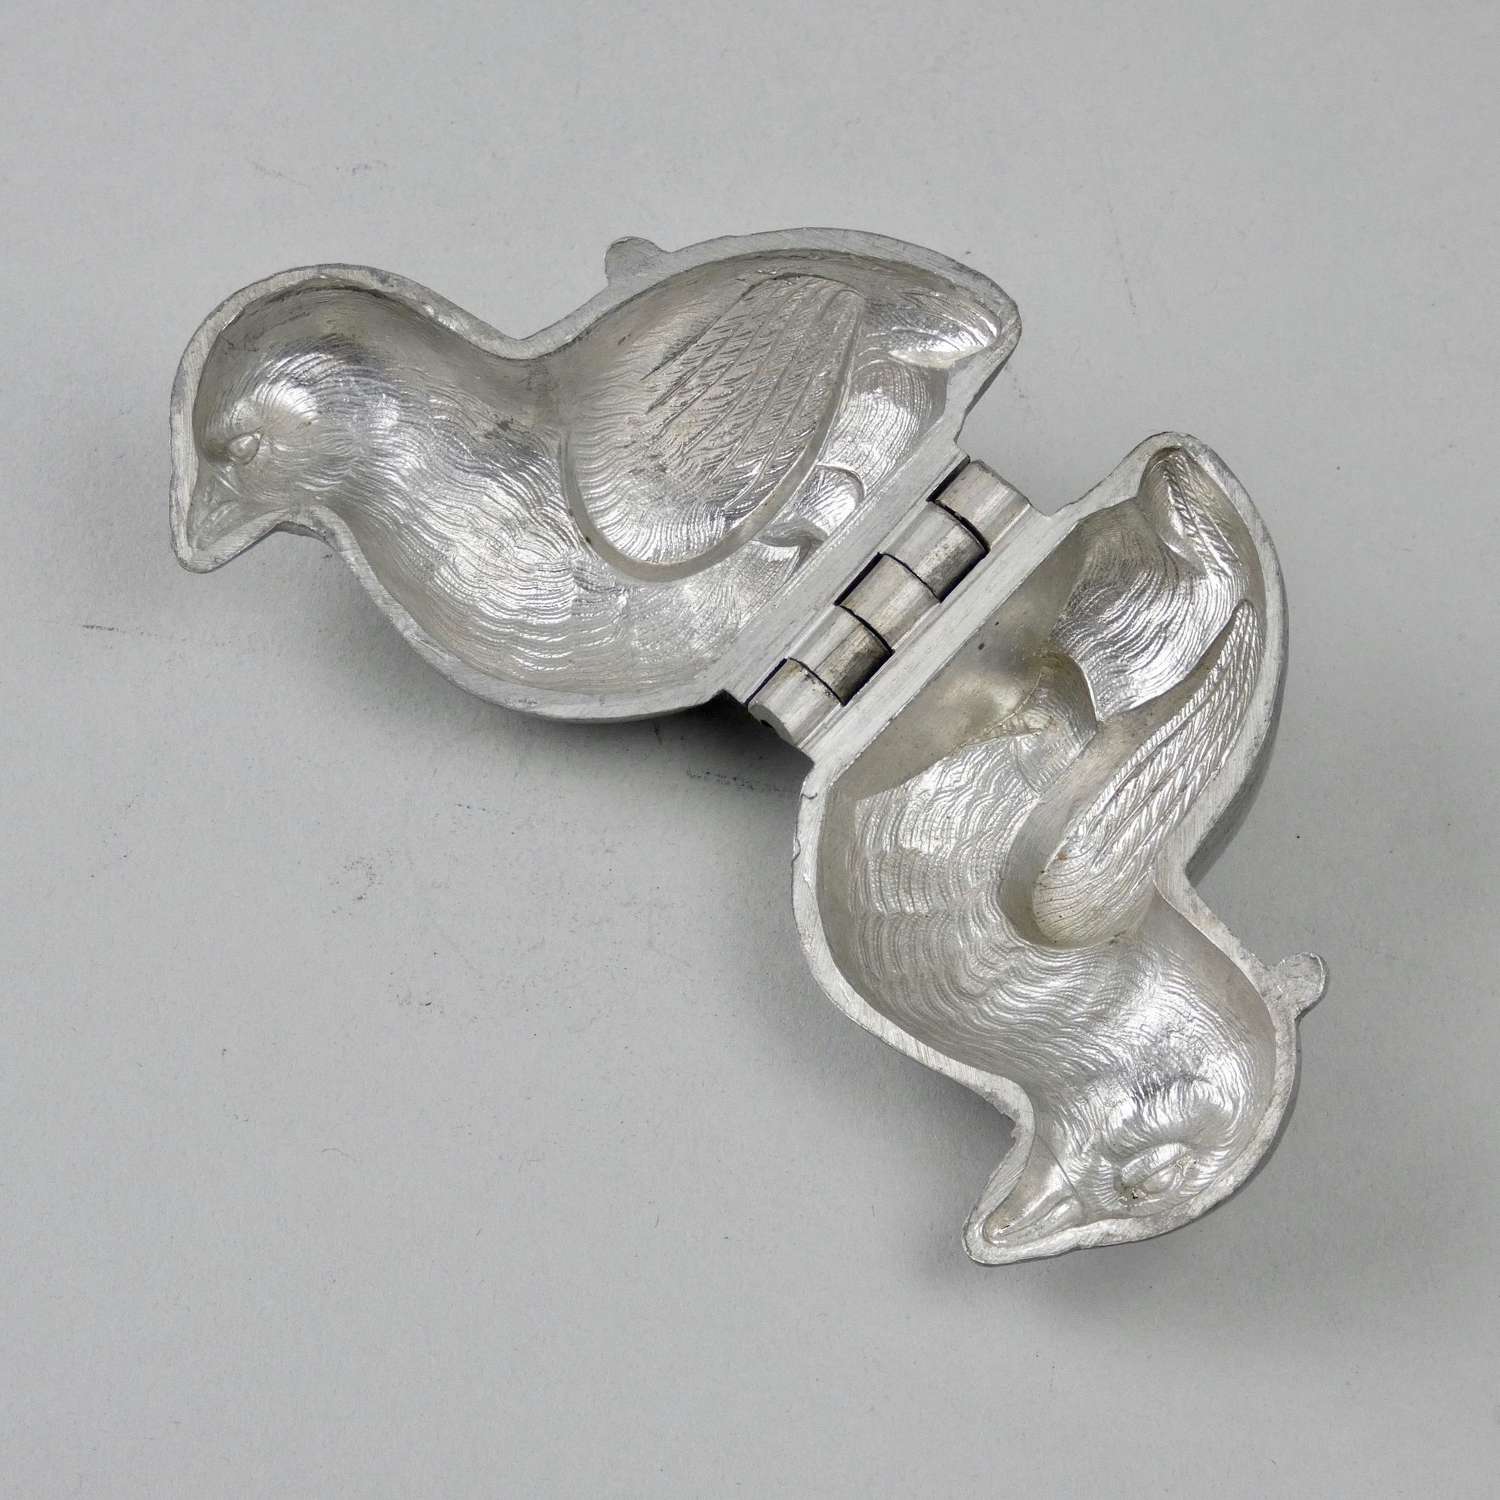 Pewter 'chick' mould